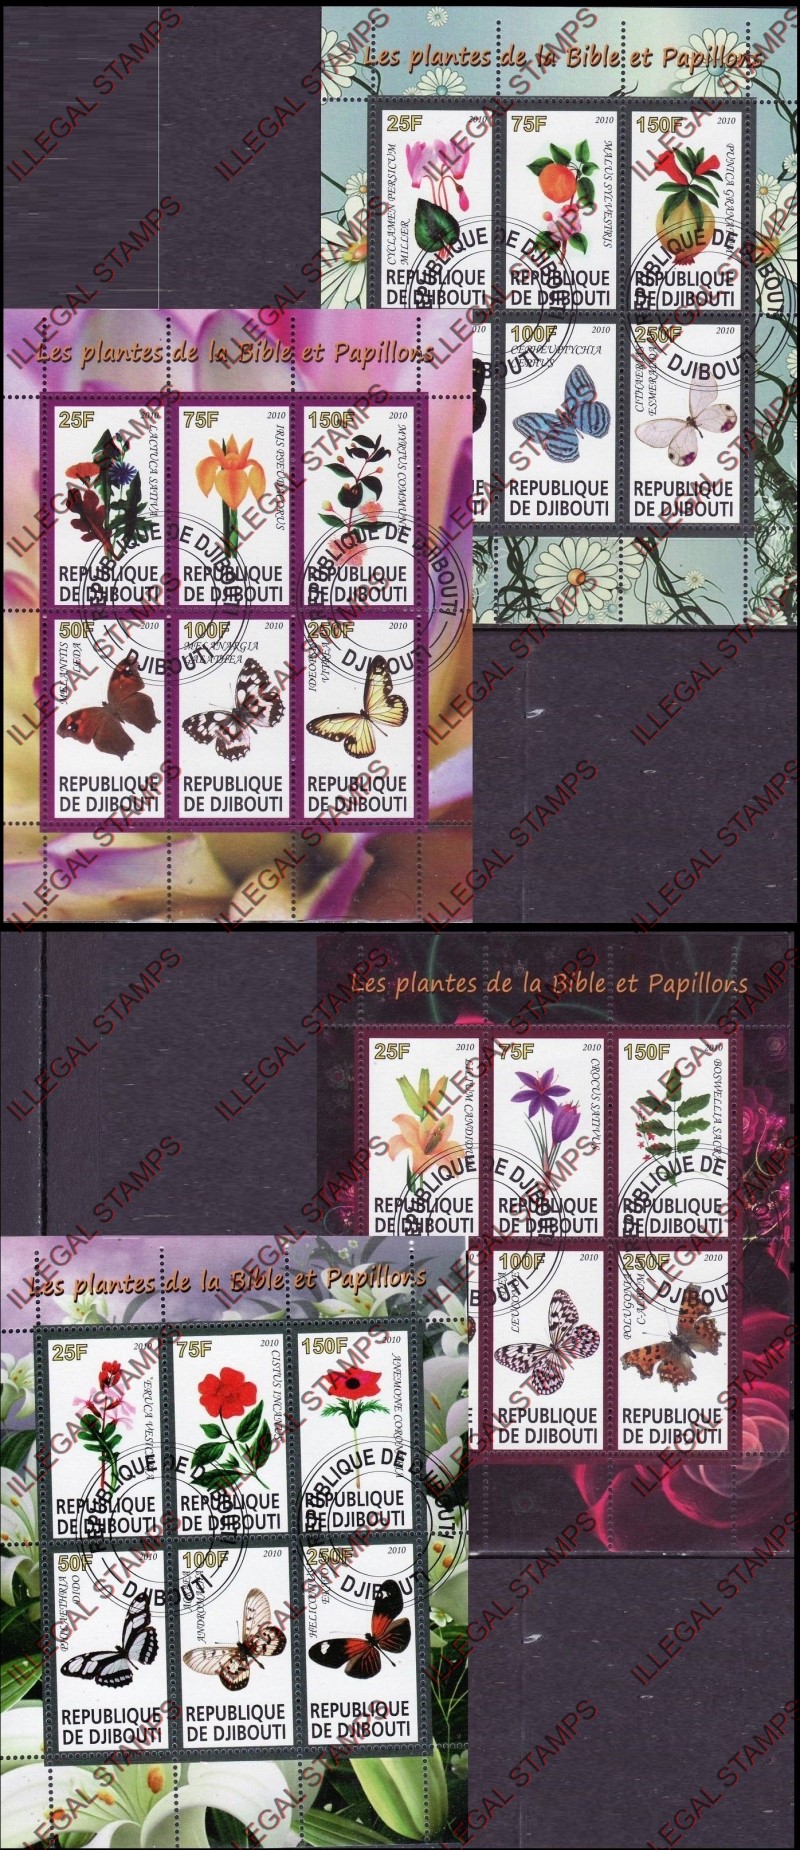 Djibouti 2010 Butterflies and Flowers Illegal Stamp Sheetlets of 6